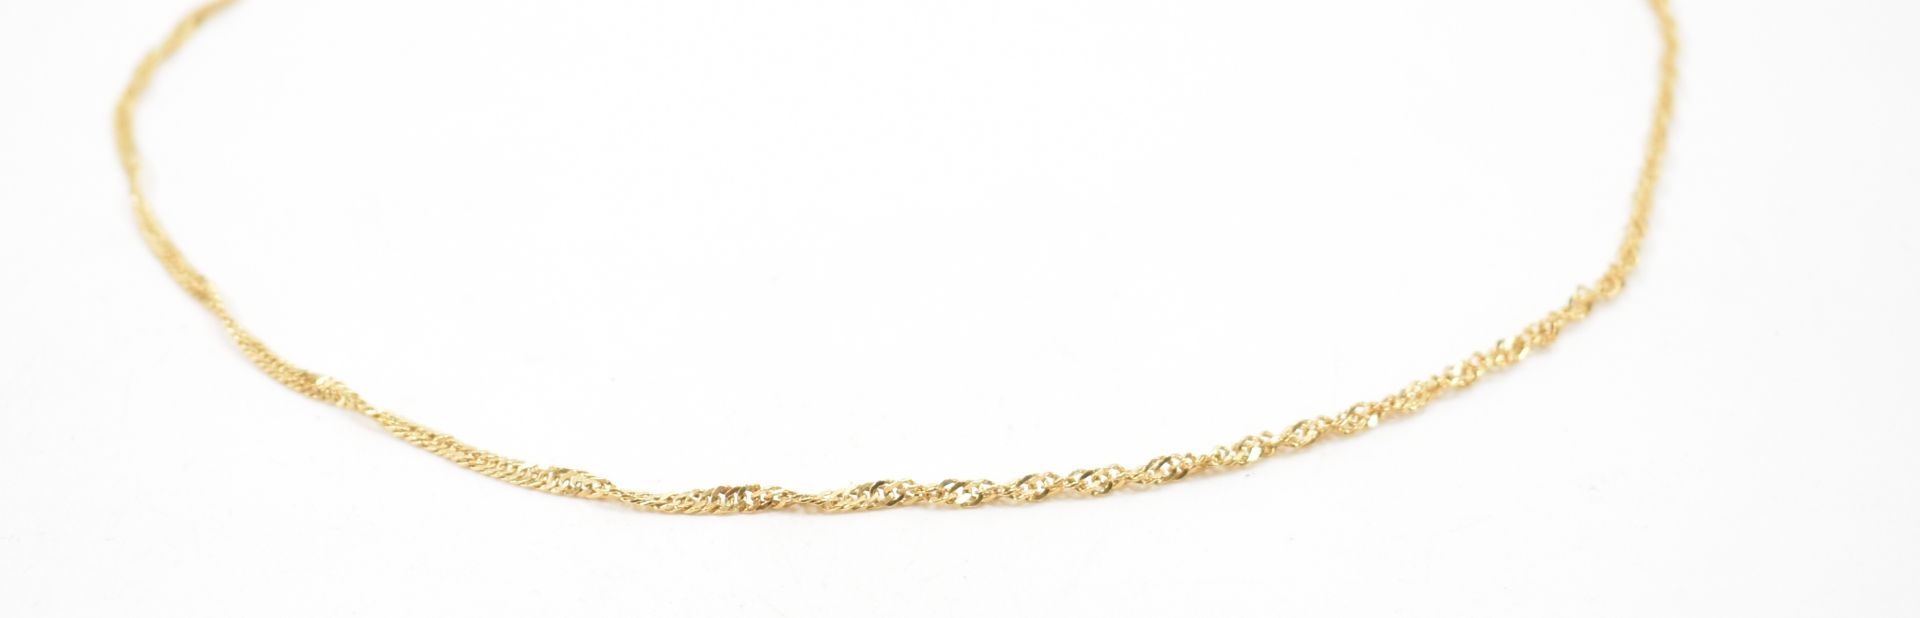 GOLD ROPE TWIST NECKLACE CHAIN - Image 3 of 4